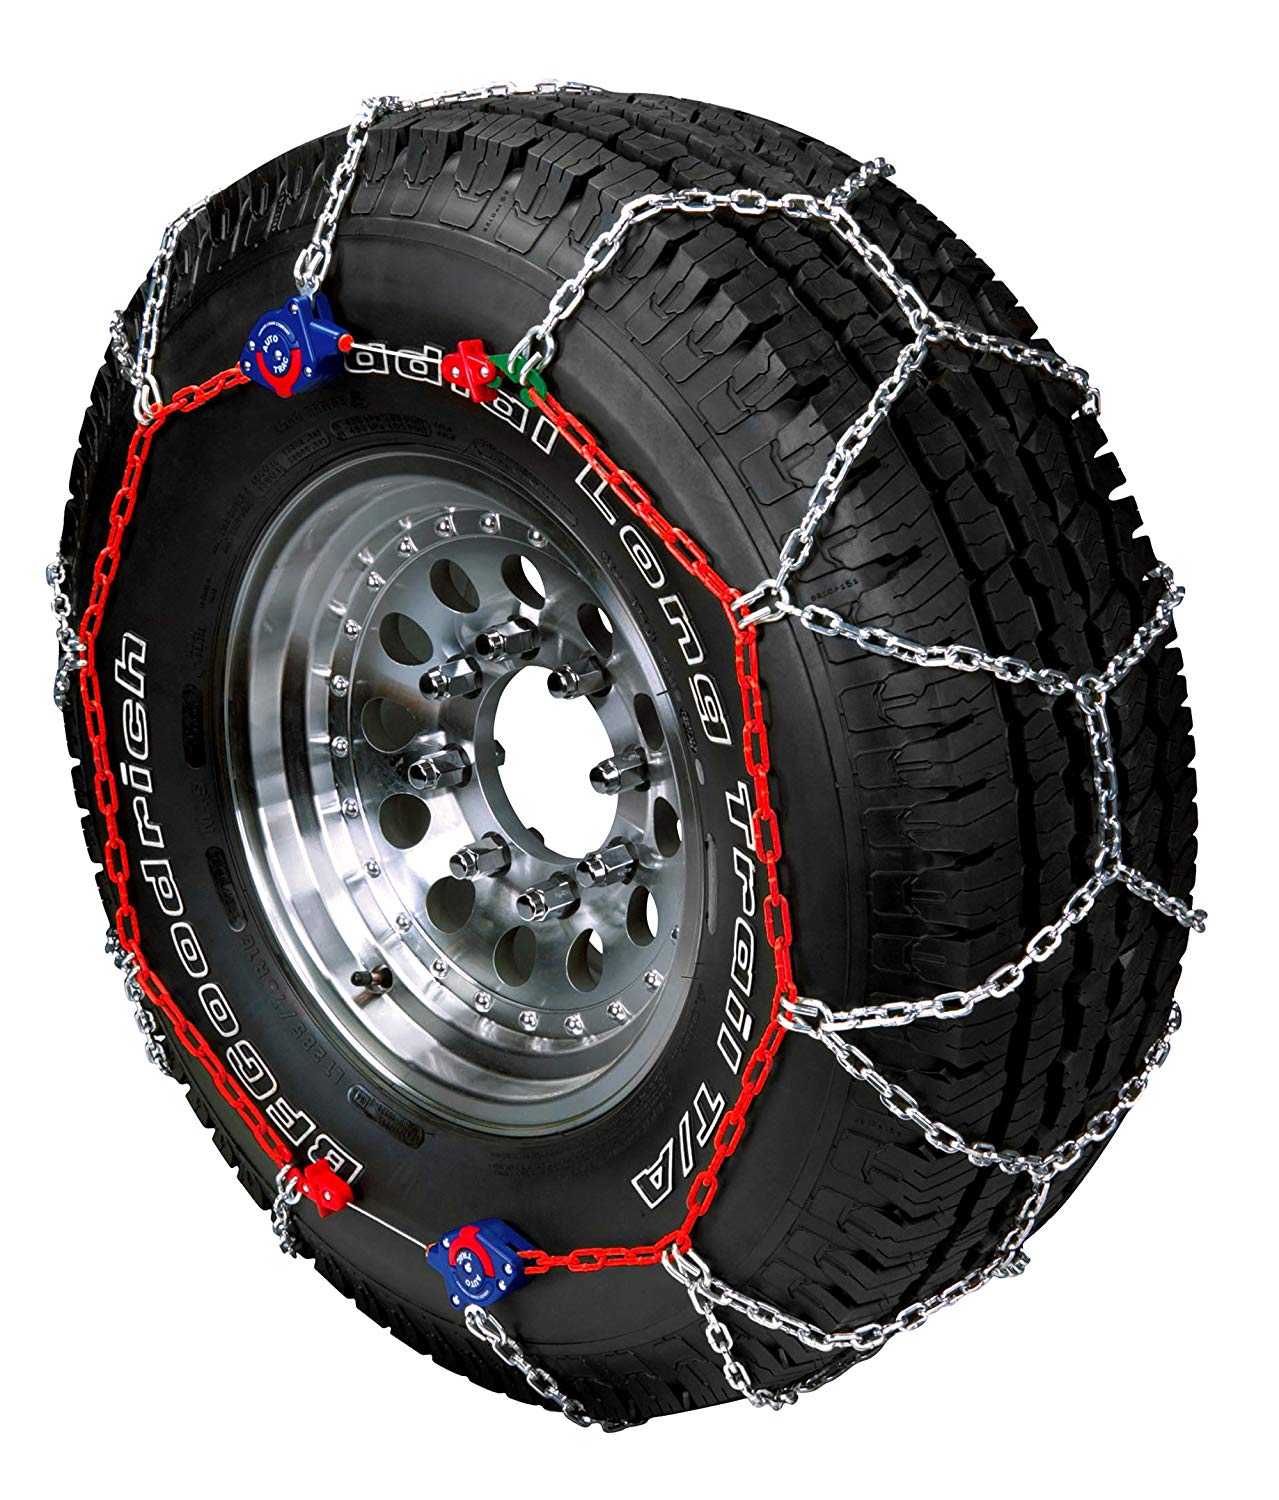 The 10 Best SUV Snow Chains to Buy 2020 - Auto Quarterly